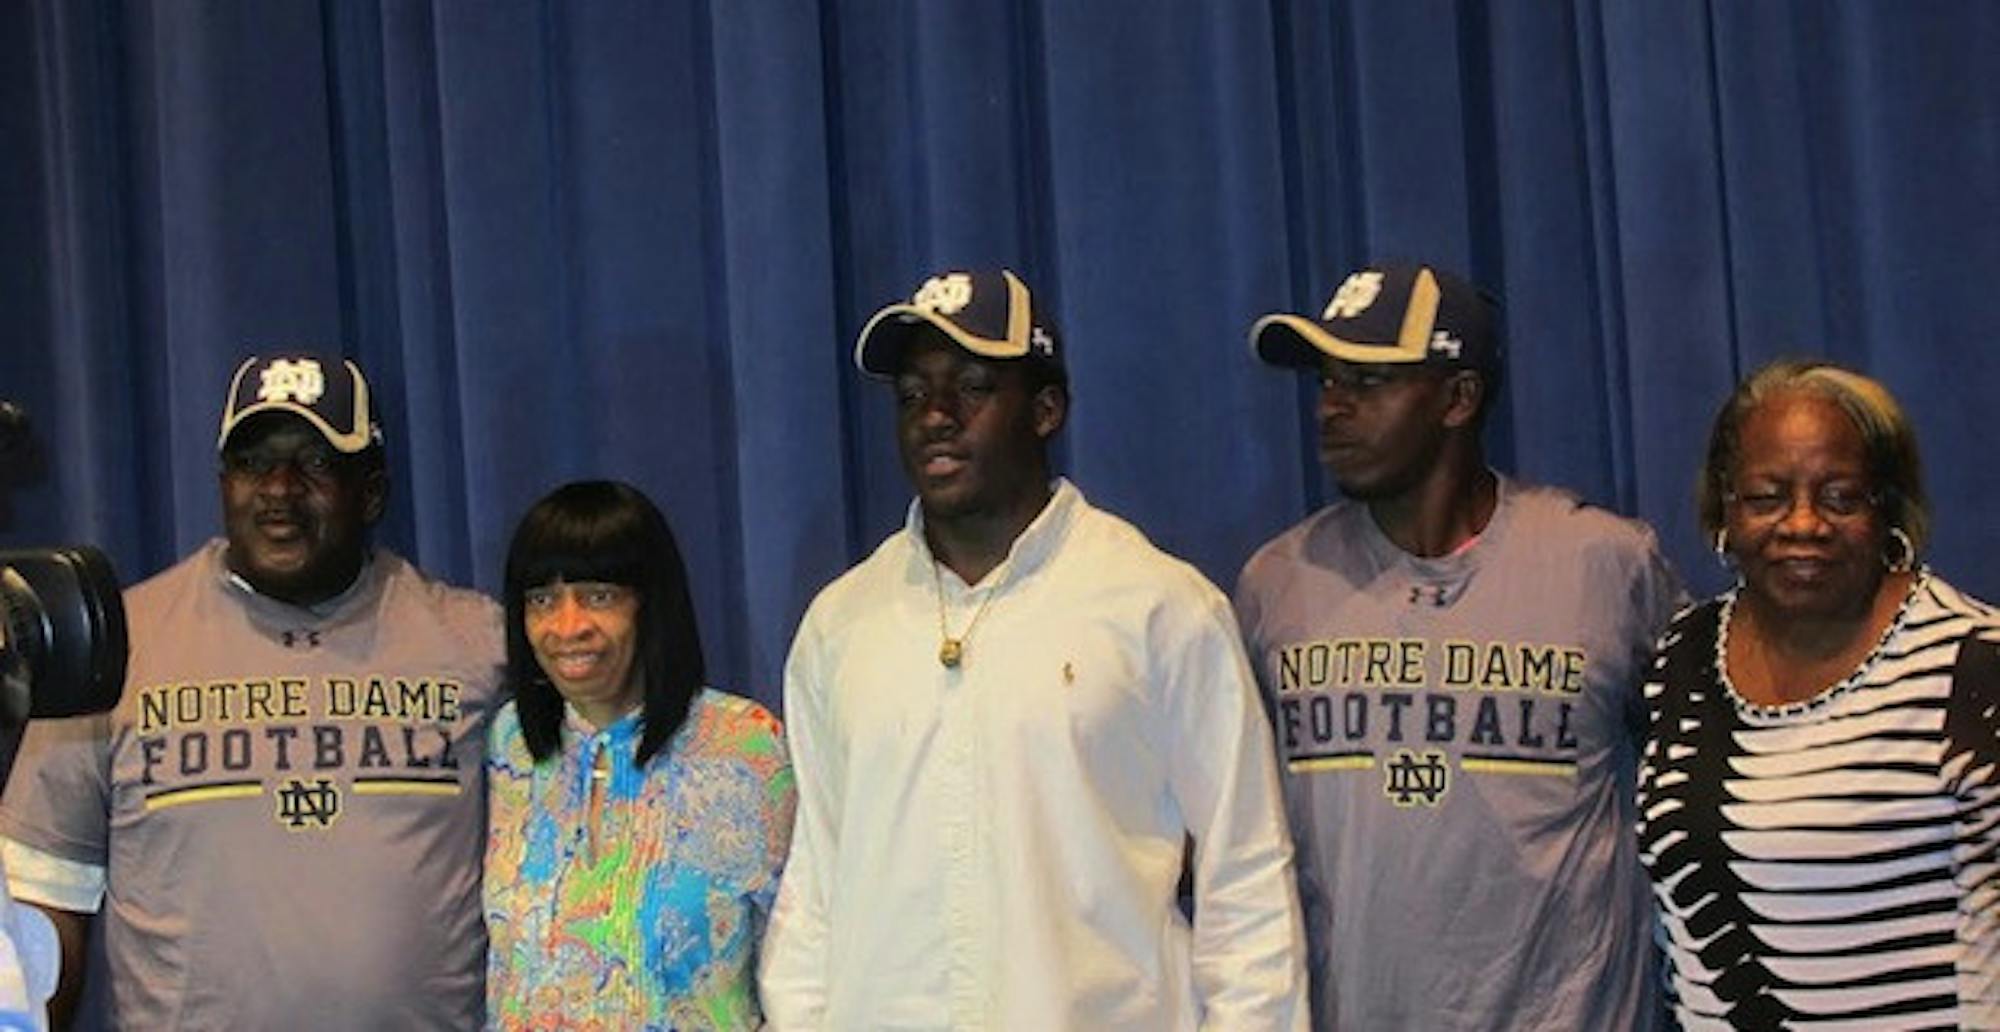 Class of 2015 linebacker Tevon Coney committed to Notre Dame on Oct. 23 in Florida, becoming the 21st commitment in the Irish class.